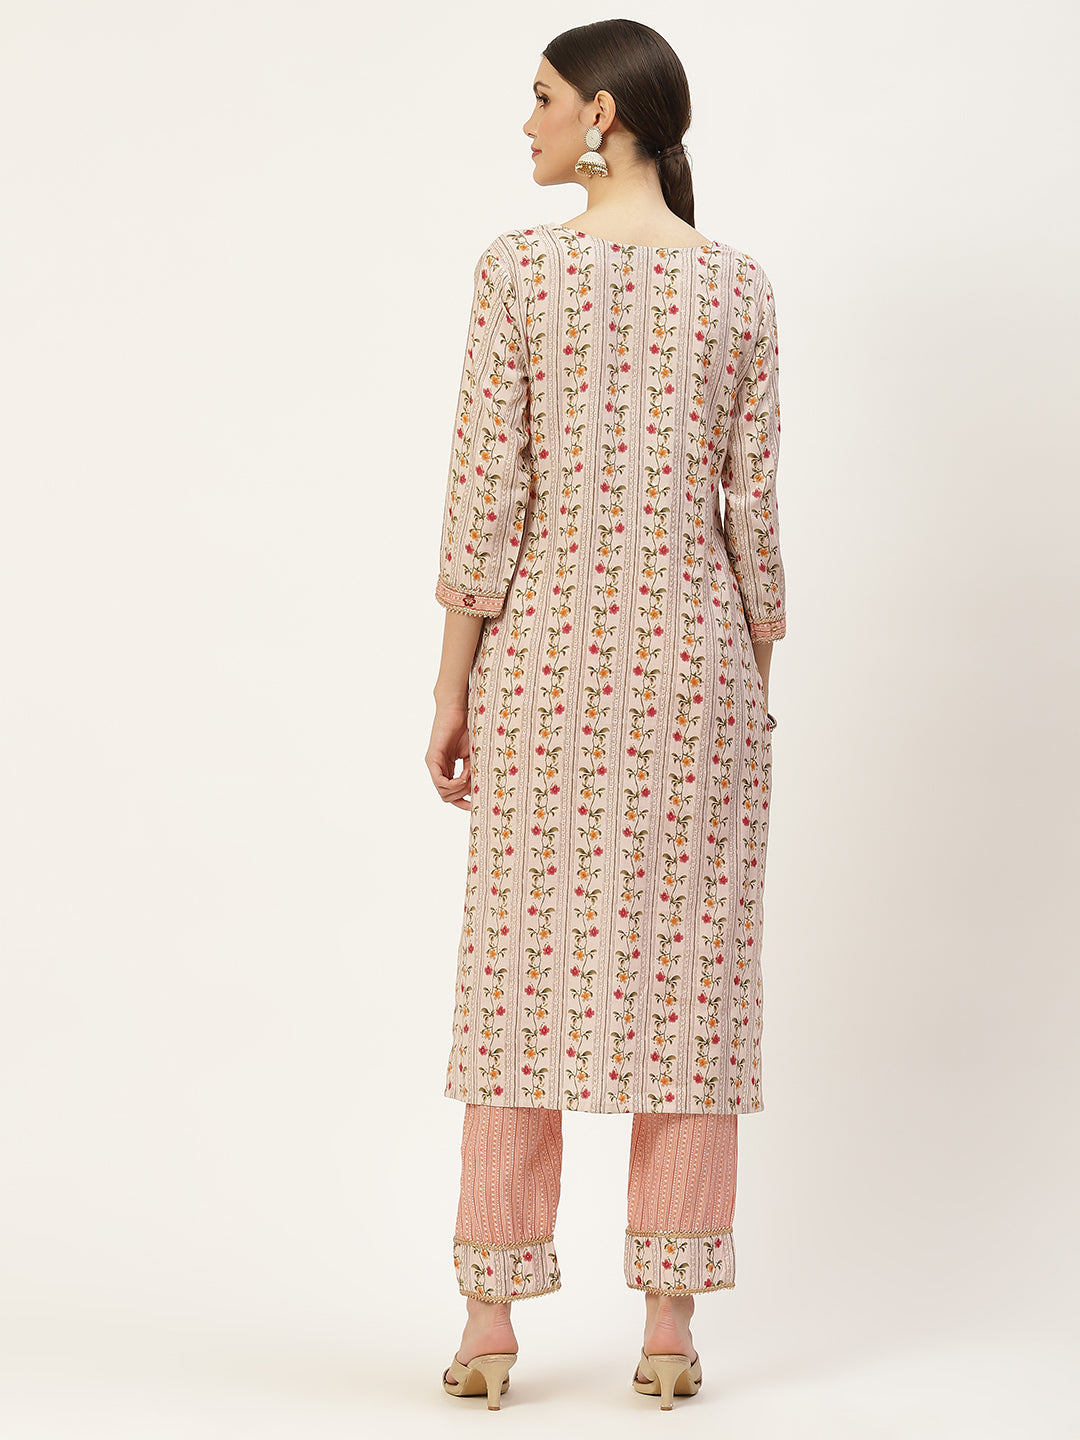 Pink embroidered Kurta with Trousers